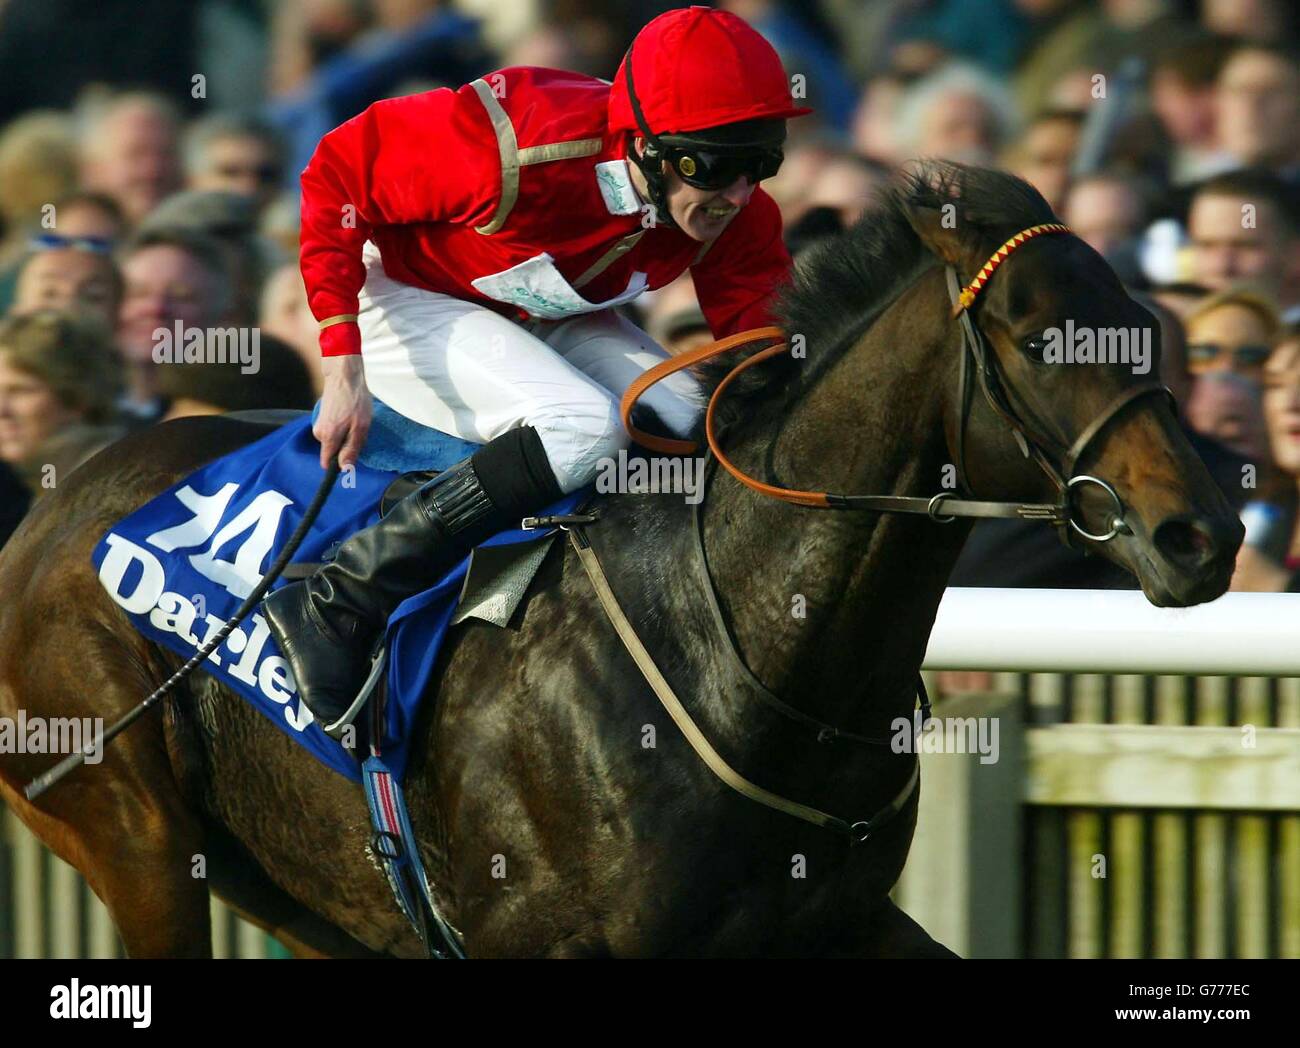 Tout Seul with jockey Steve Carson, wins the Darley Dewhurst Stakes at the Rowley Mile Racecourse, Newmarket, Suffolk. Stock Photo